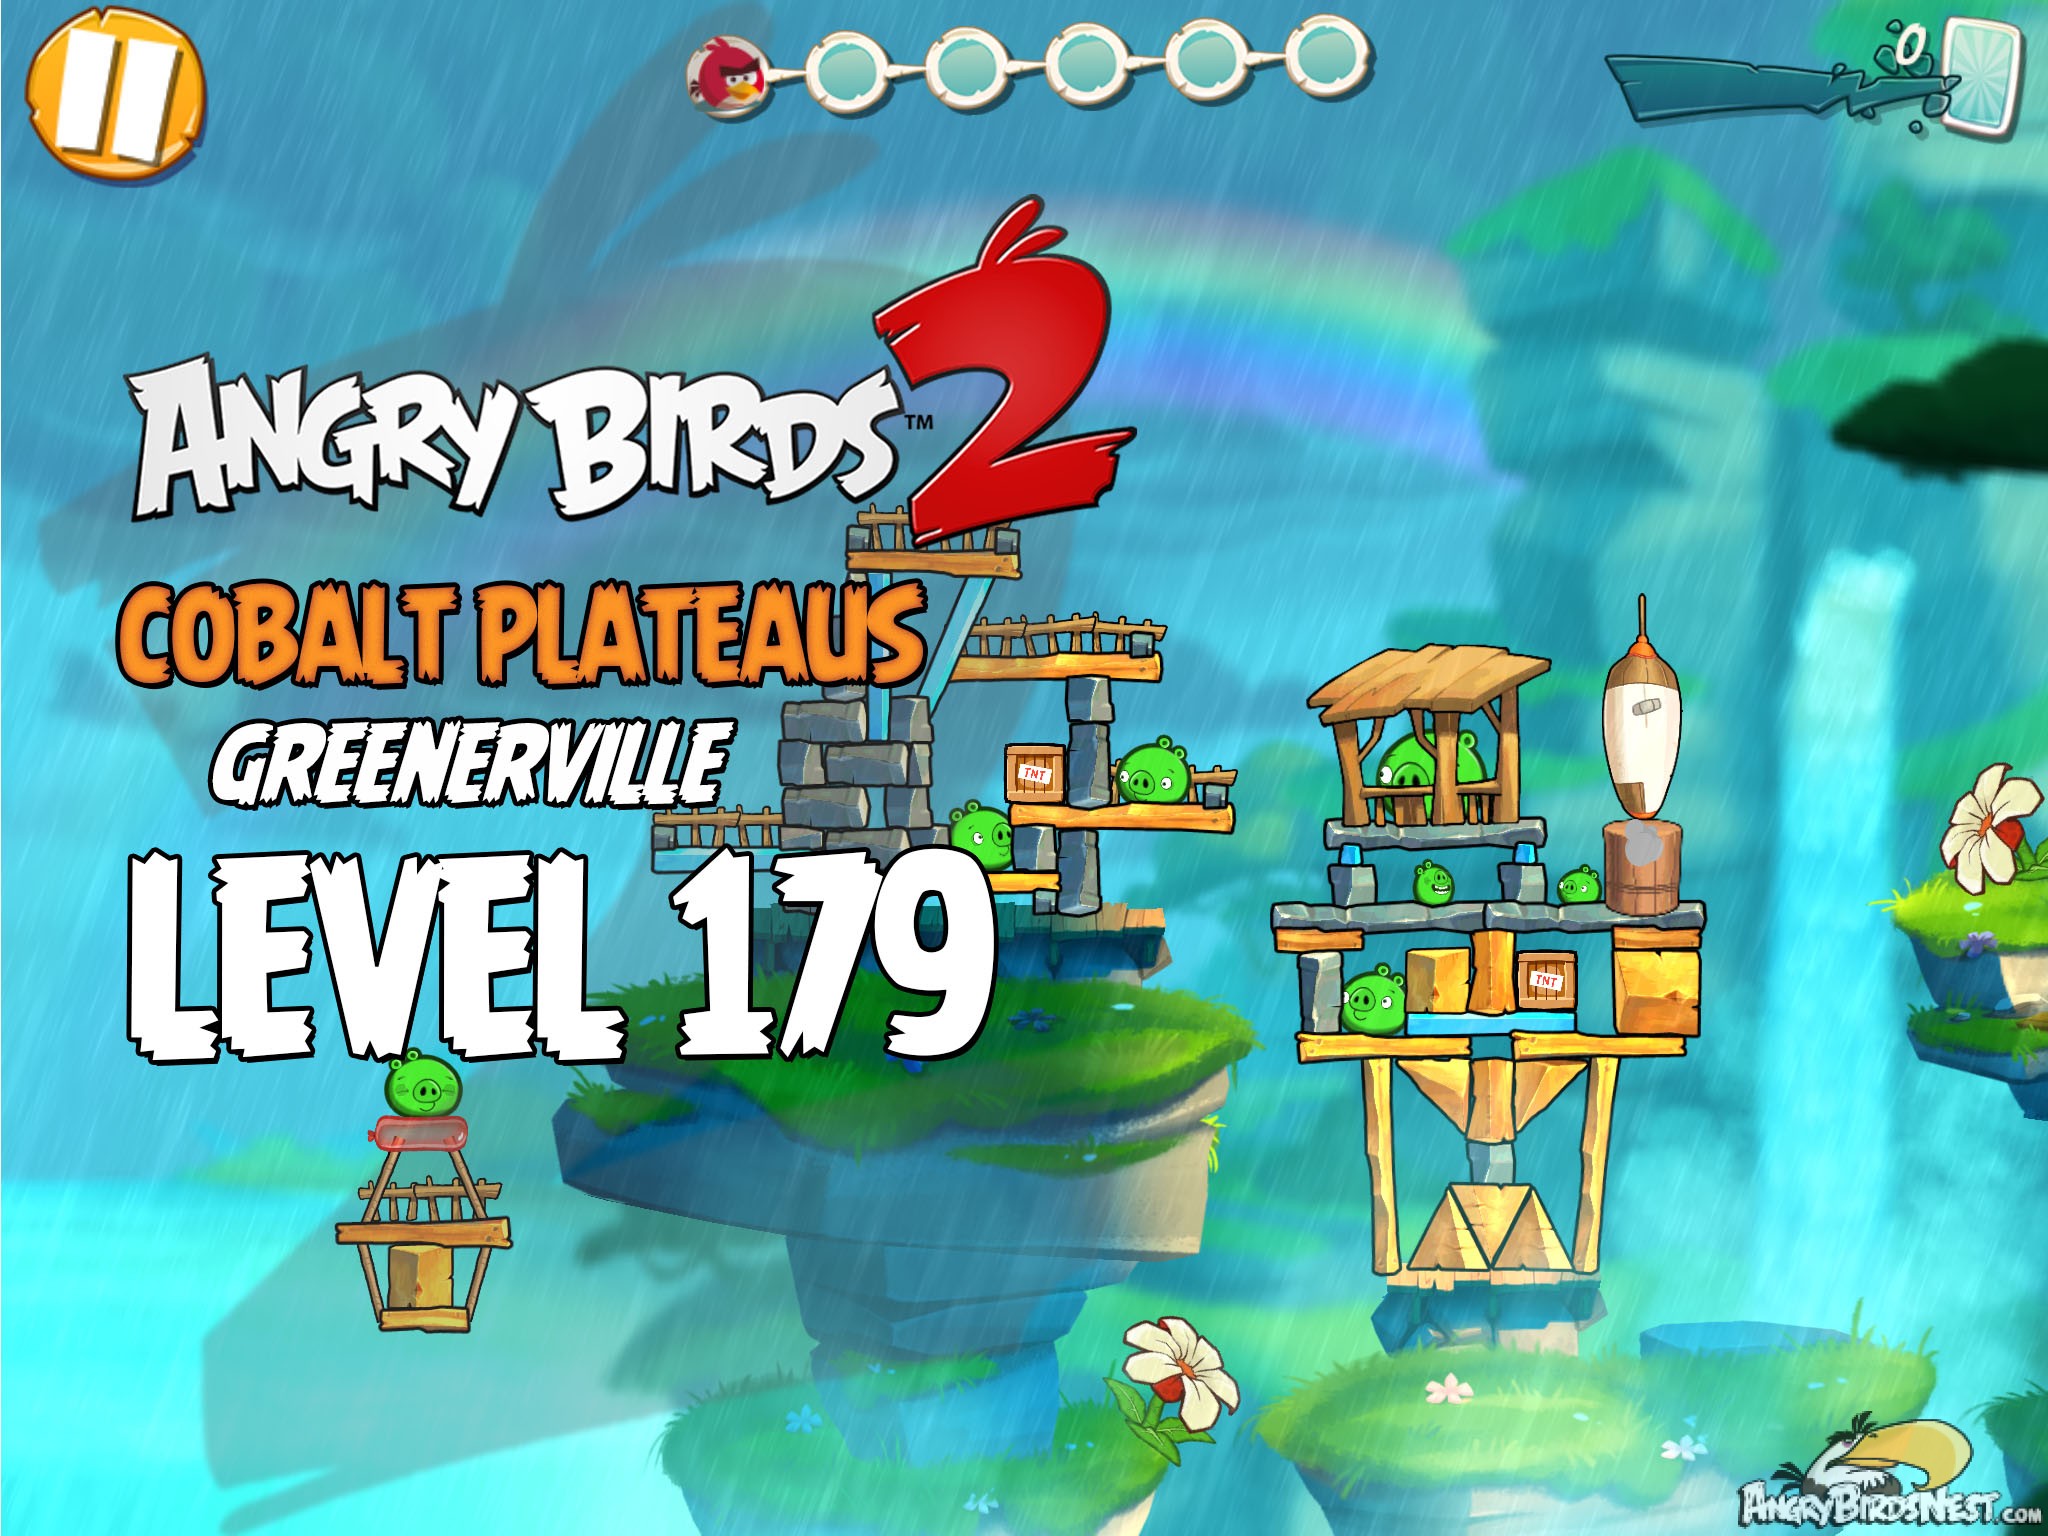 Angry Birds 2 Cobalt Plateaus Greenerville Level 179